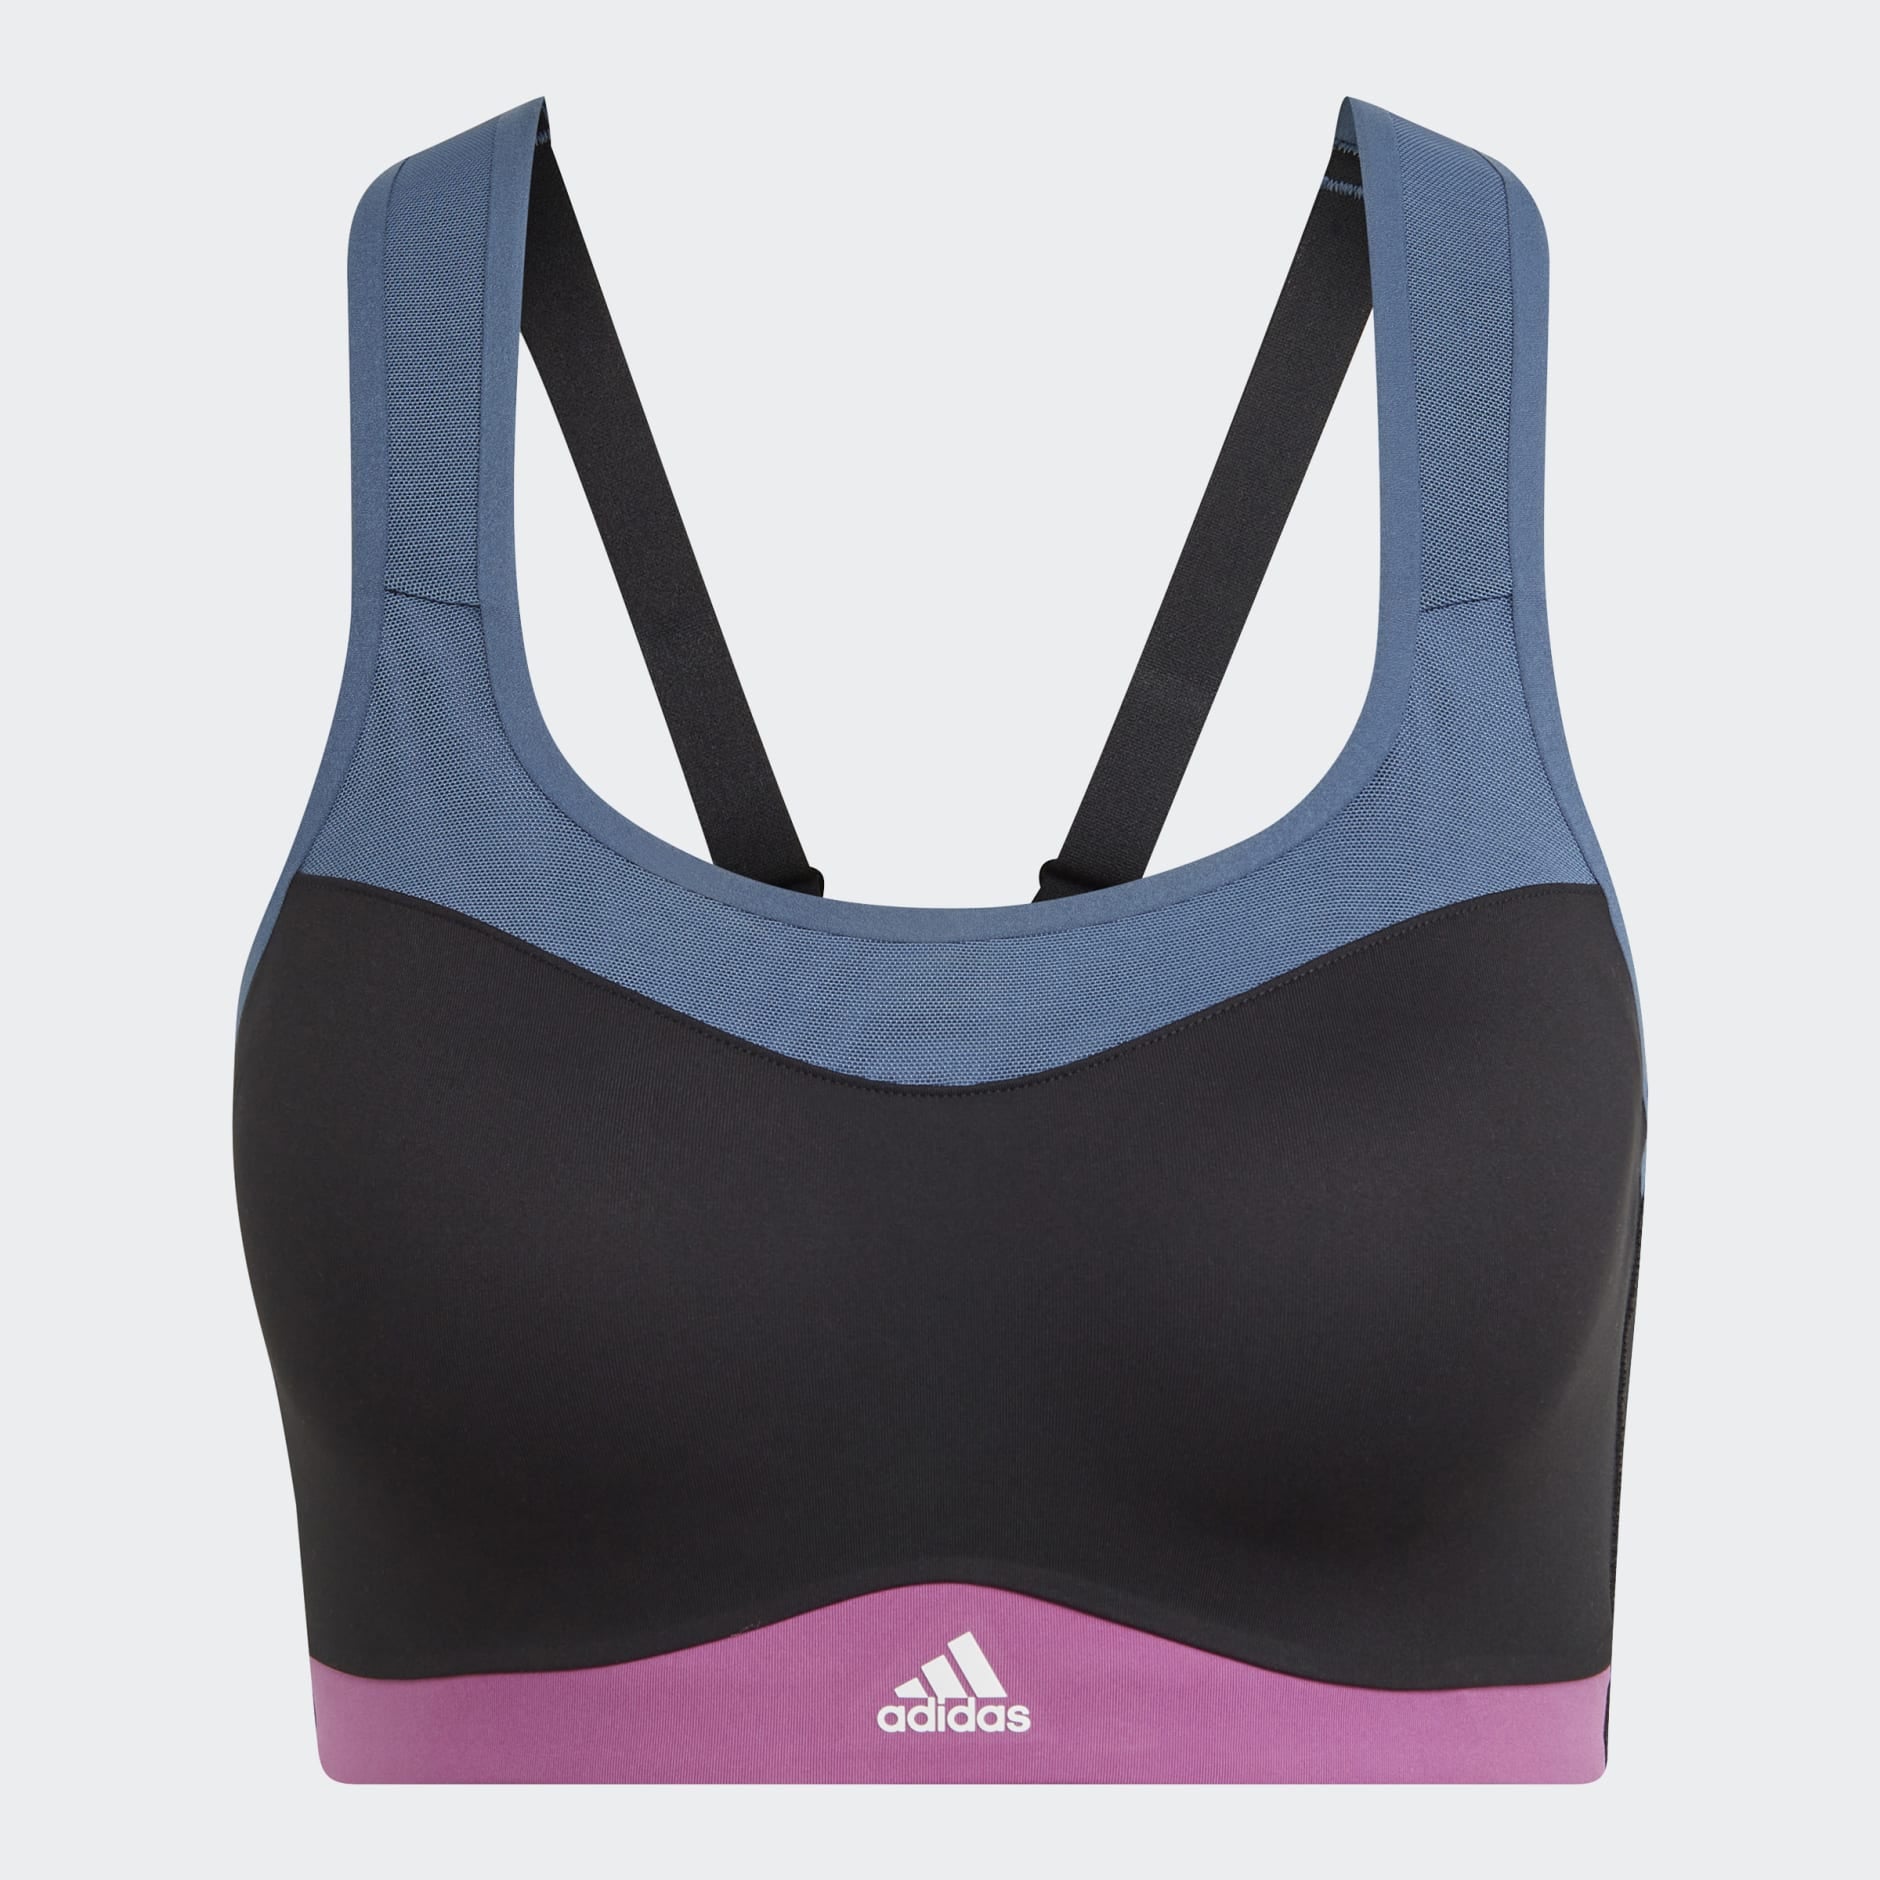 Women's Clothing - adidas TLRD Impact Training High-Support Bra - Turquoise